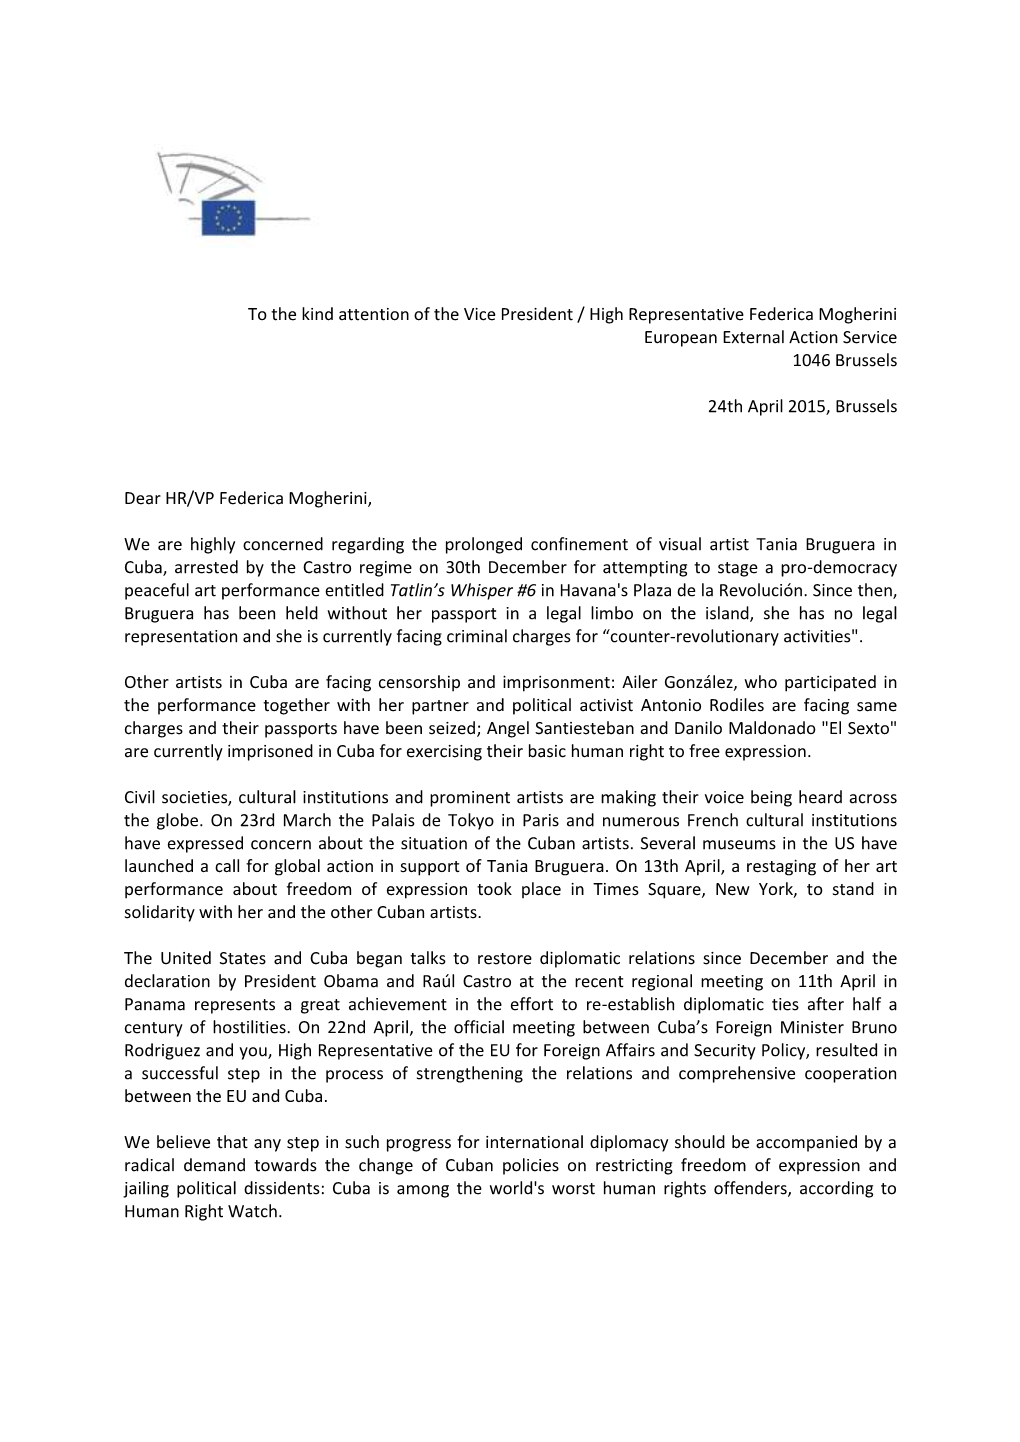 To the Kind Attention of the Vice President / High Representative Federica Mogherini European External Action Service 1046 Brussels